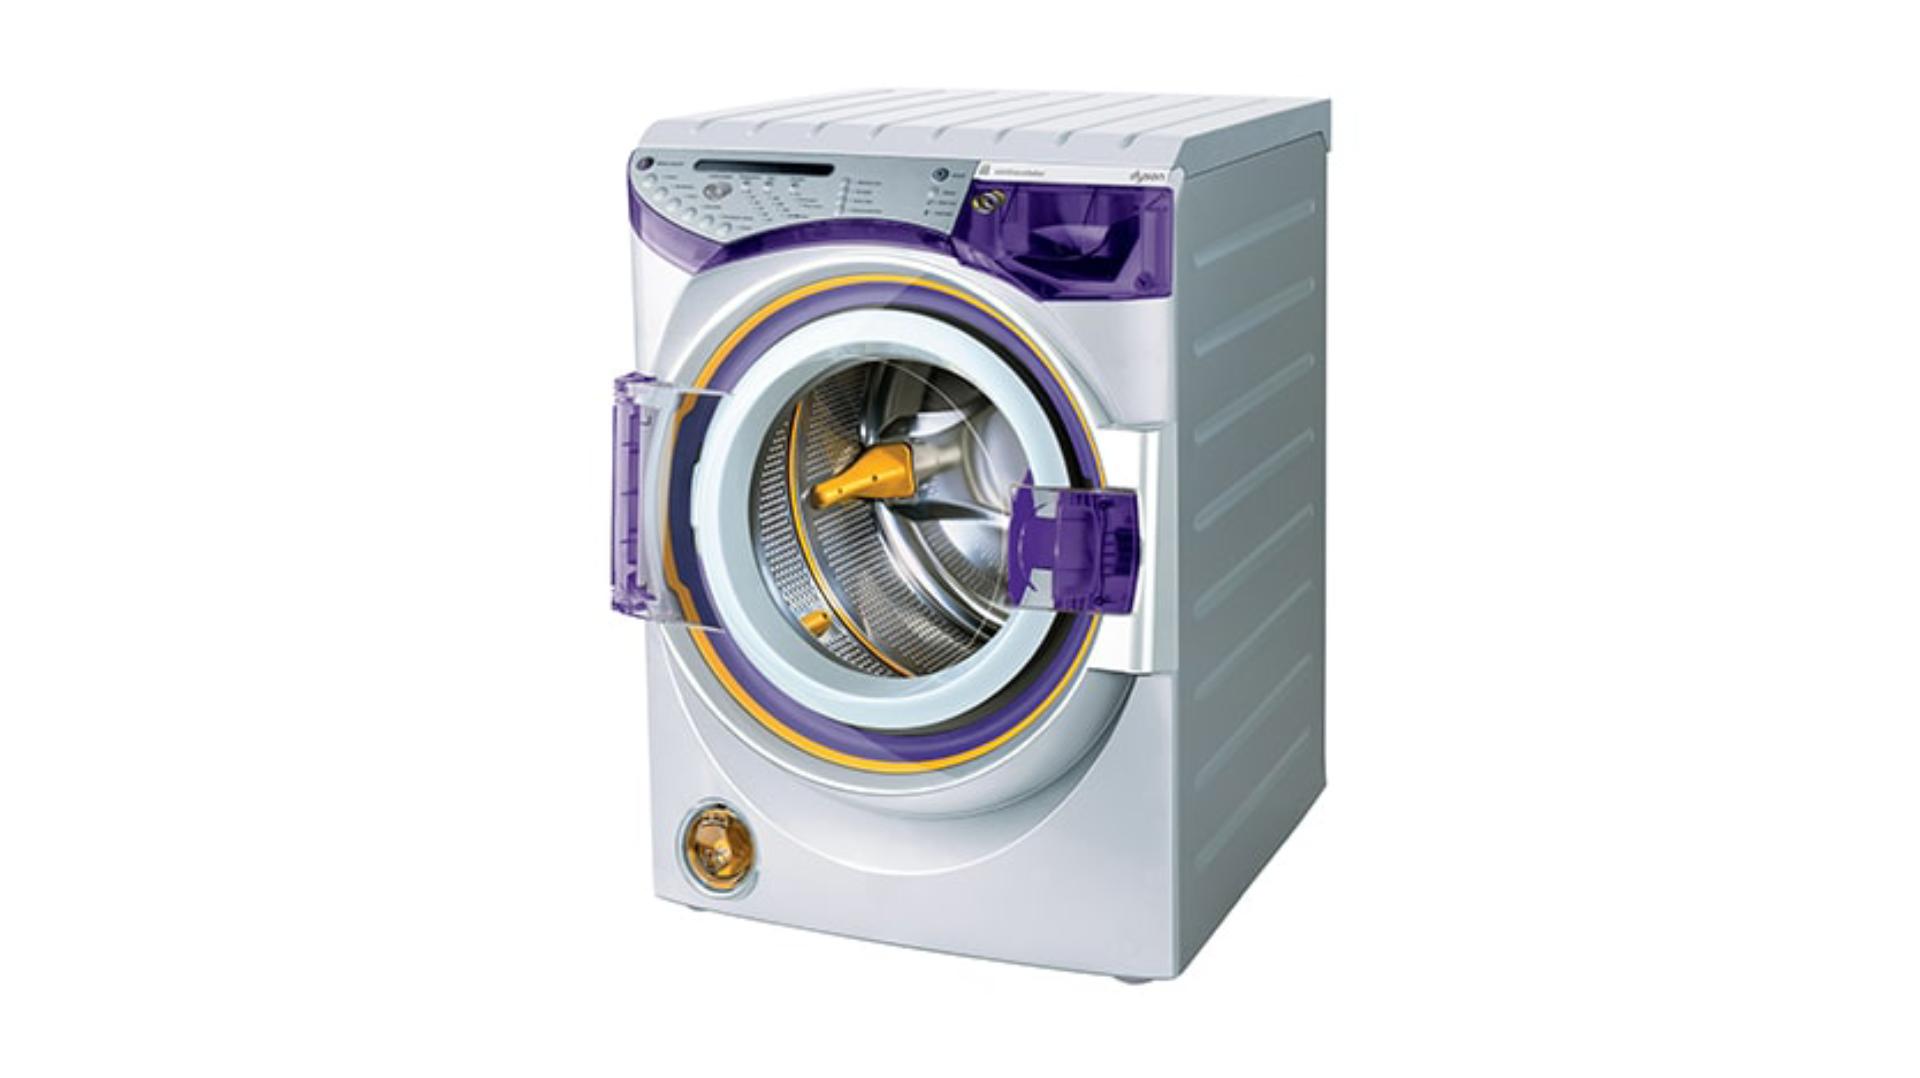 Front view of a Dyson Contratrotator washing machine